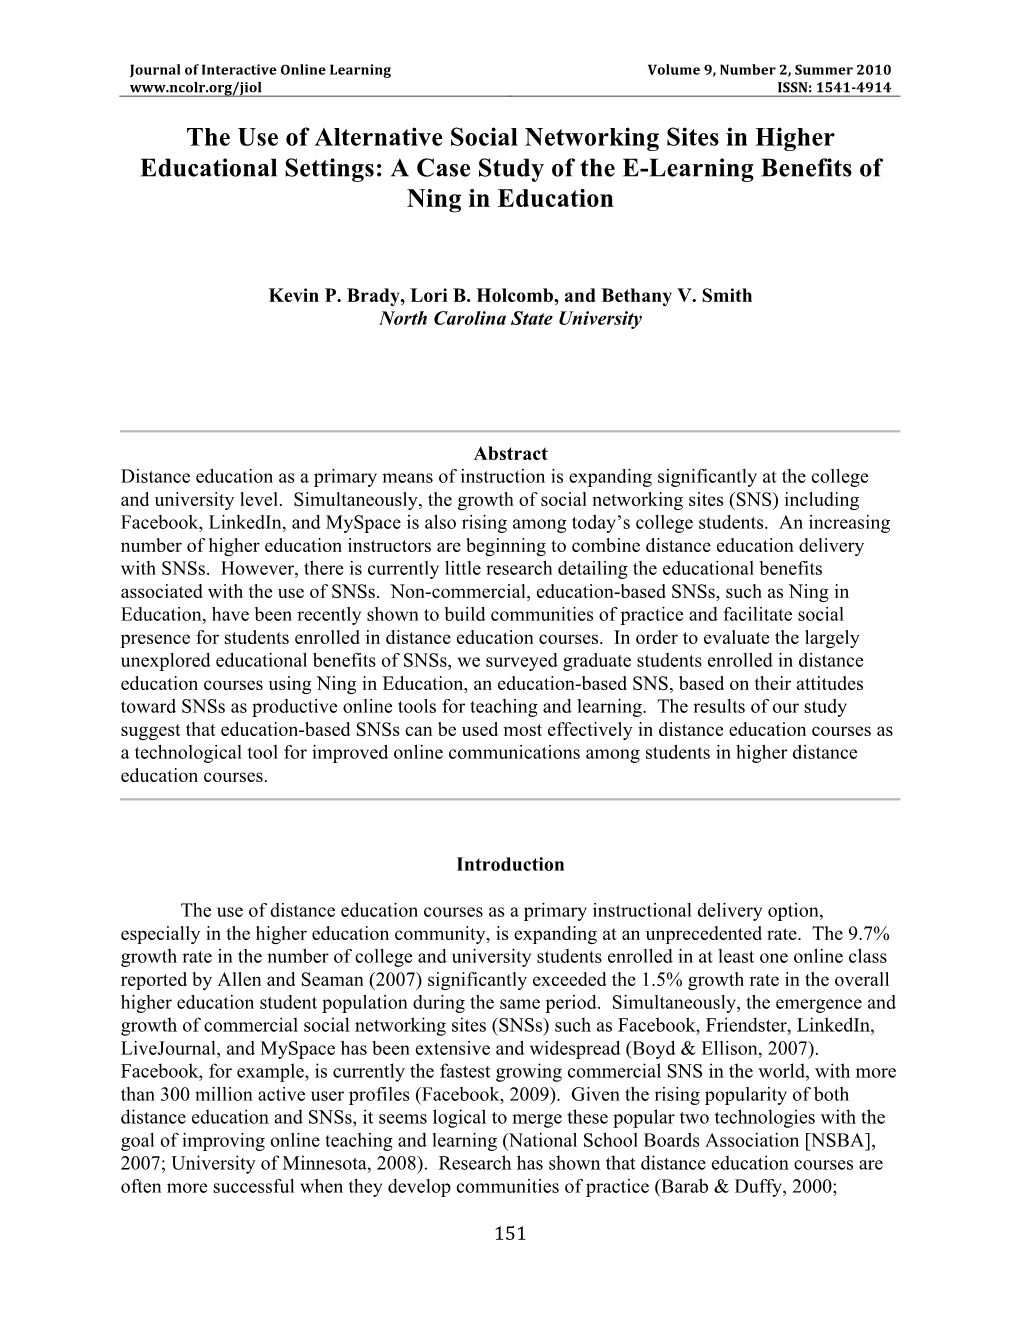 The Use of Alternative Social Networking Sites in Higher Educational Settings: a Case Study of the E-Learning Benefits of Ning in Education